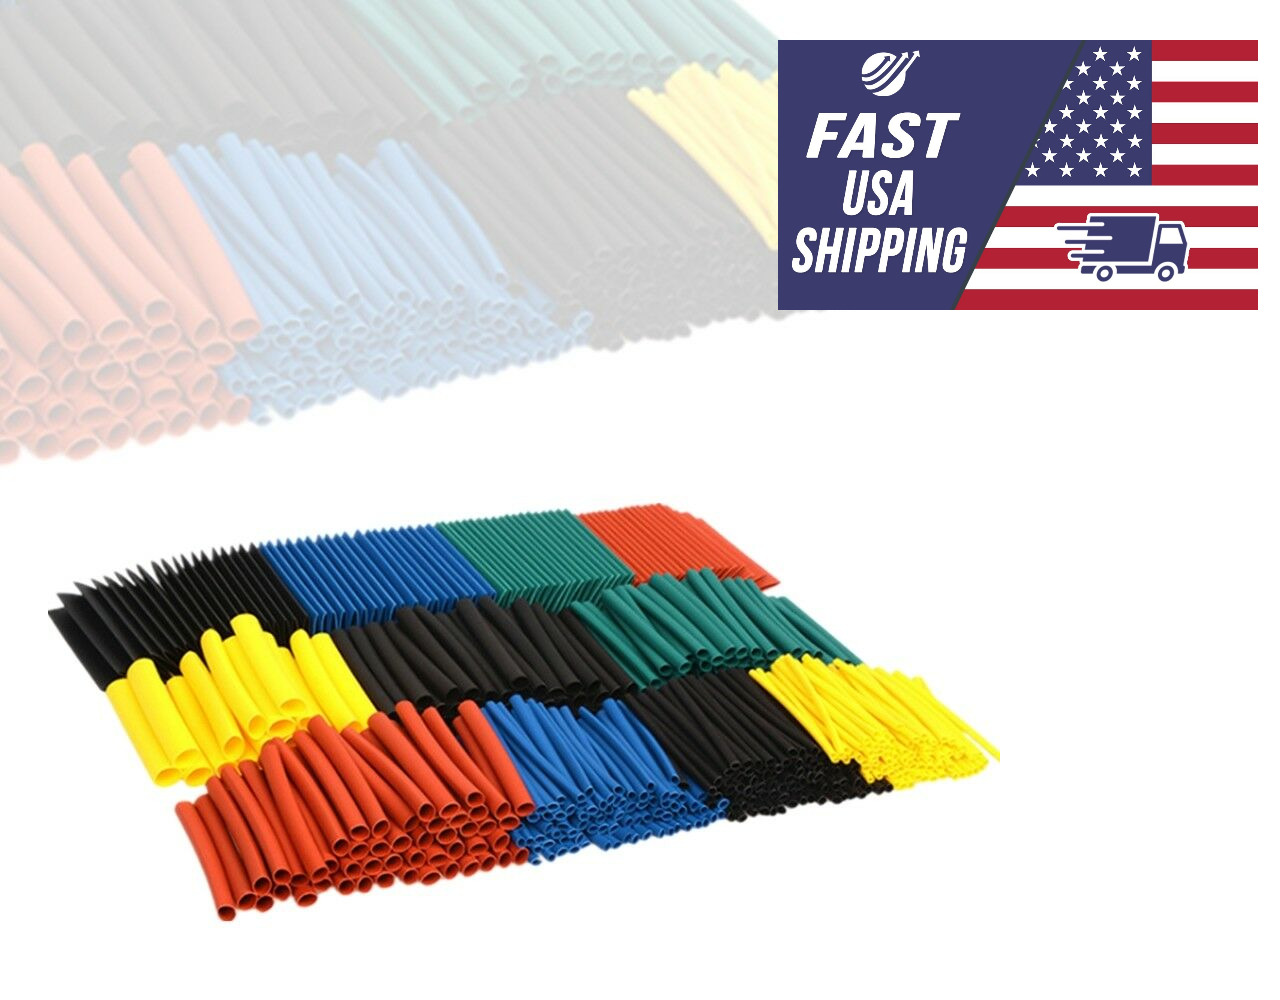 530pcs Multicolor 45mm Heat Shrink Tubing Electrical Wire Insulation Sleeve Kit